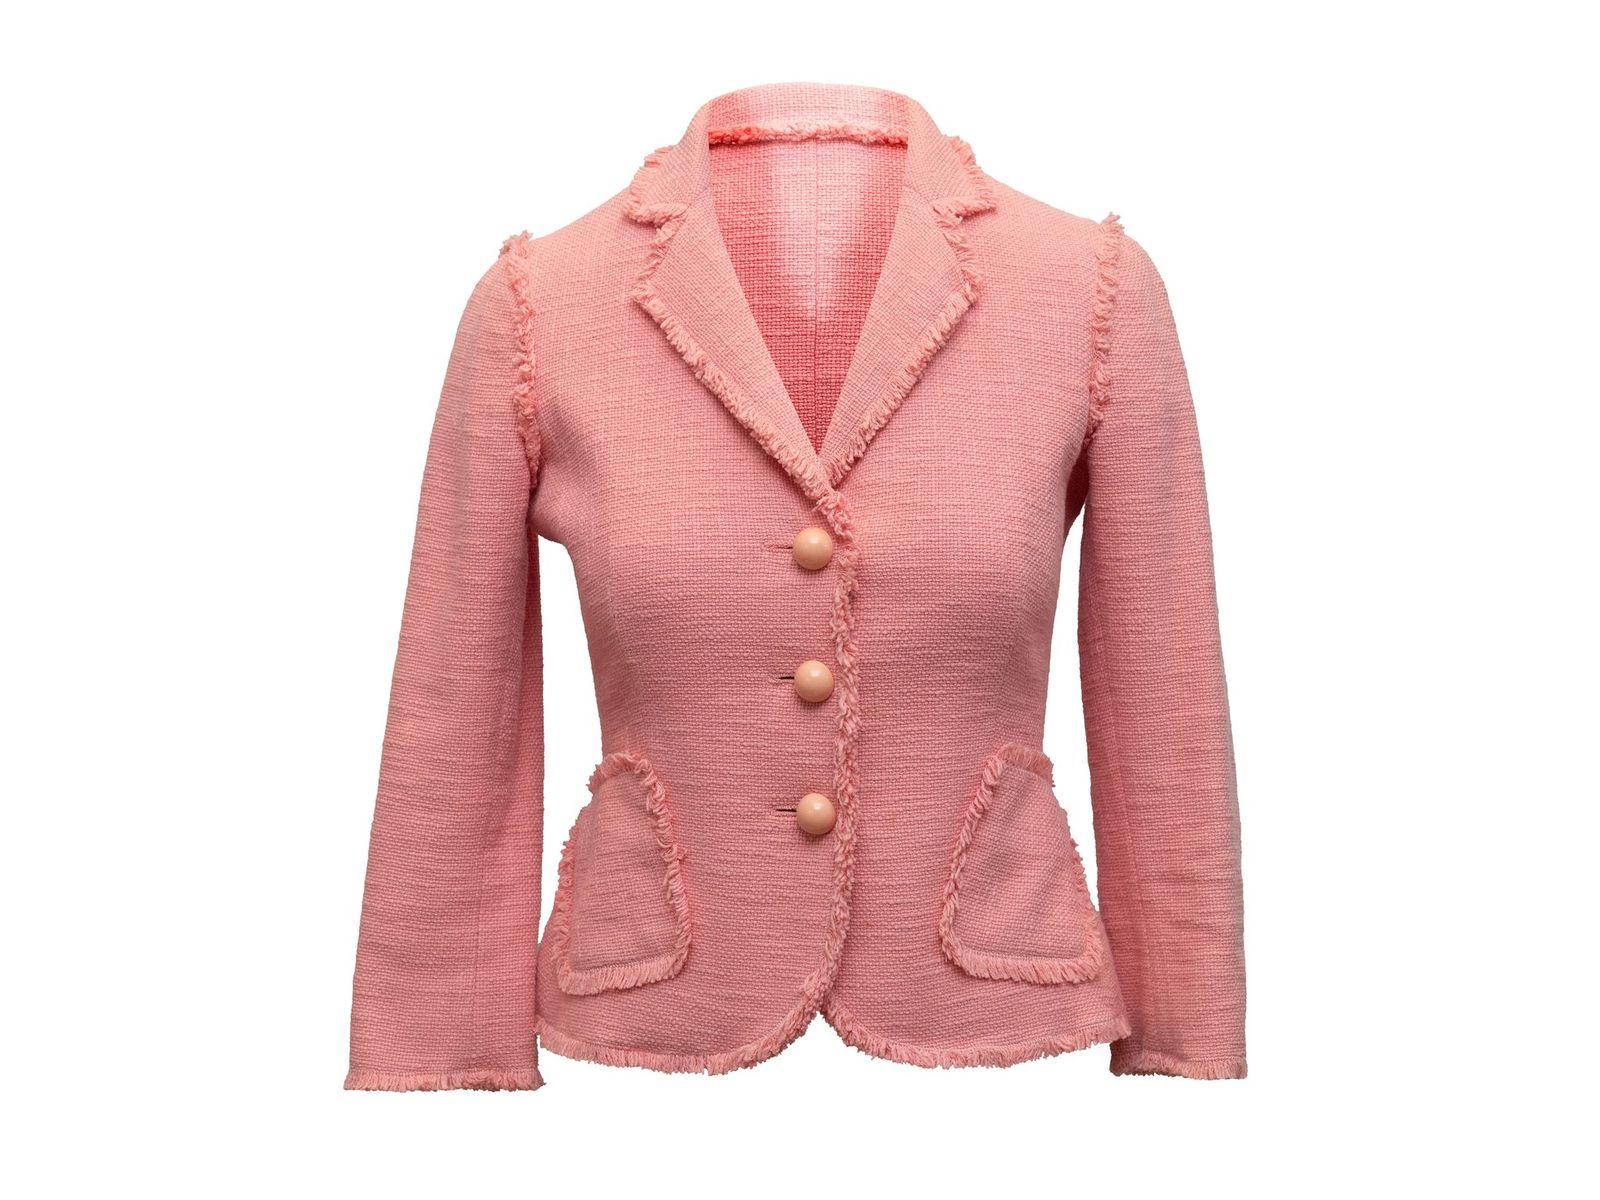 Women's Moschino Cheap and Chic Light Pink Fringe-Trimmed Blazer